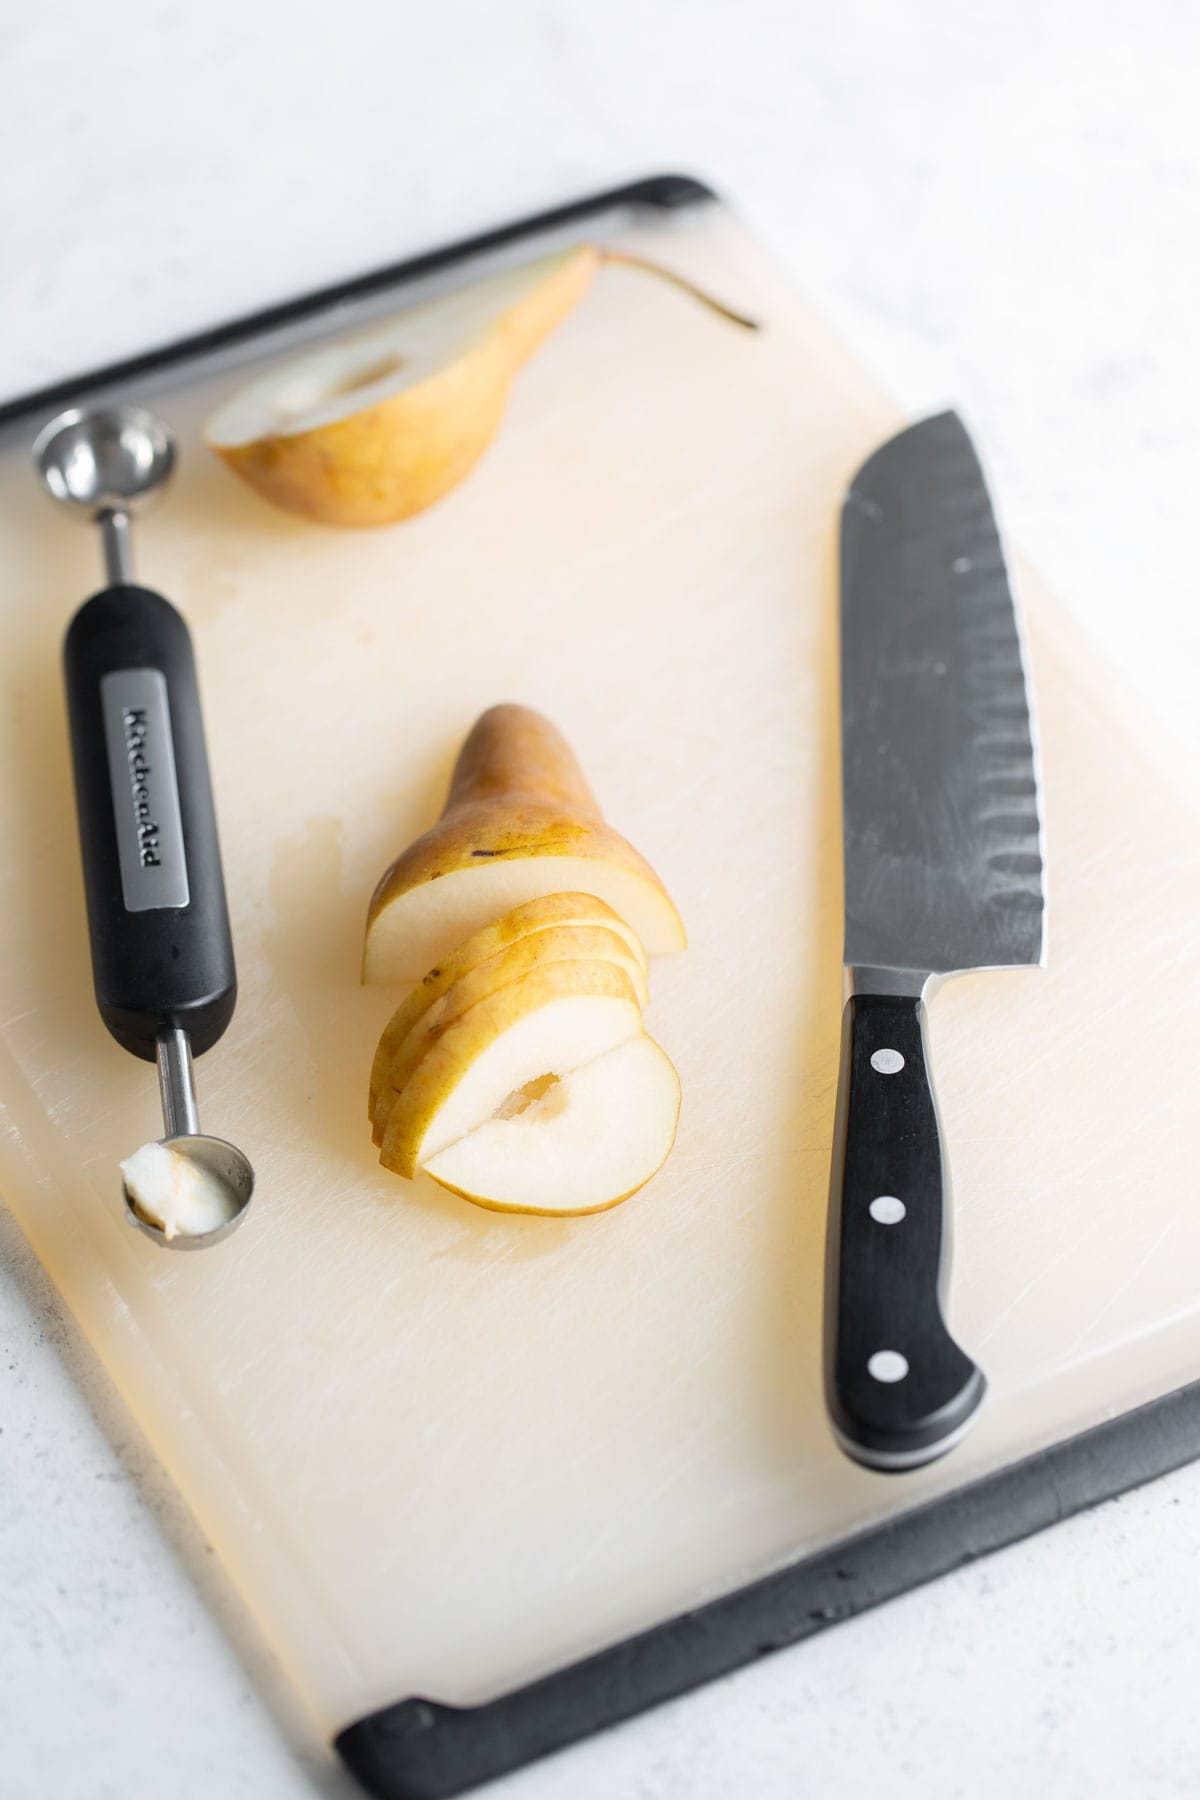 A cutting board with pears and a knife on it.